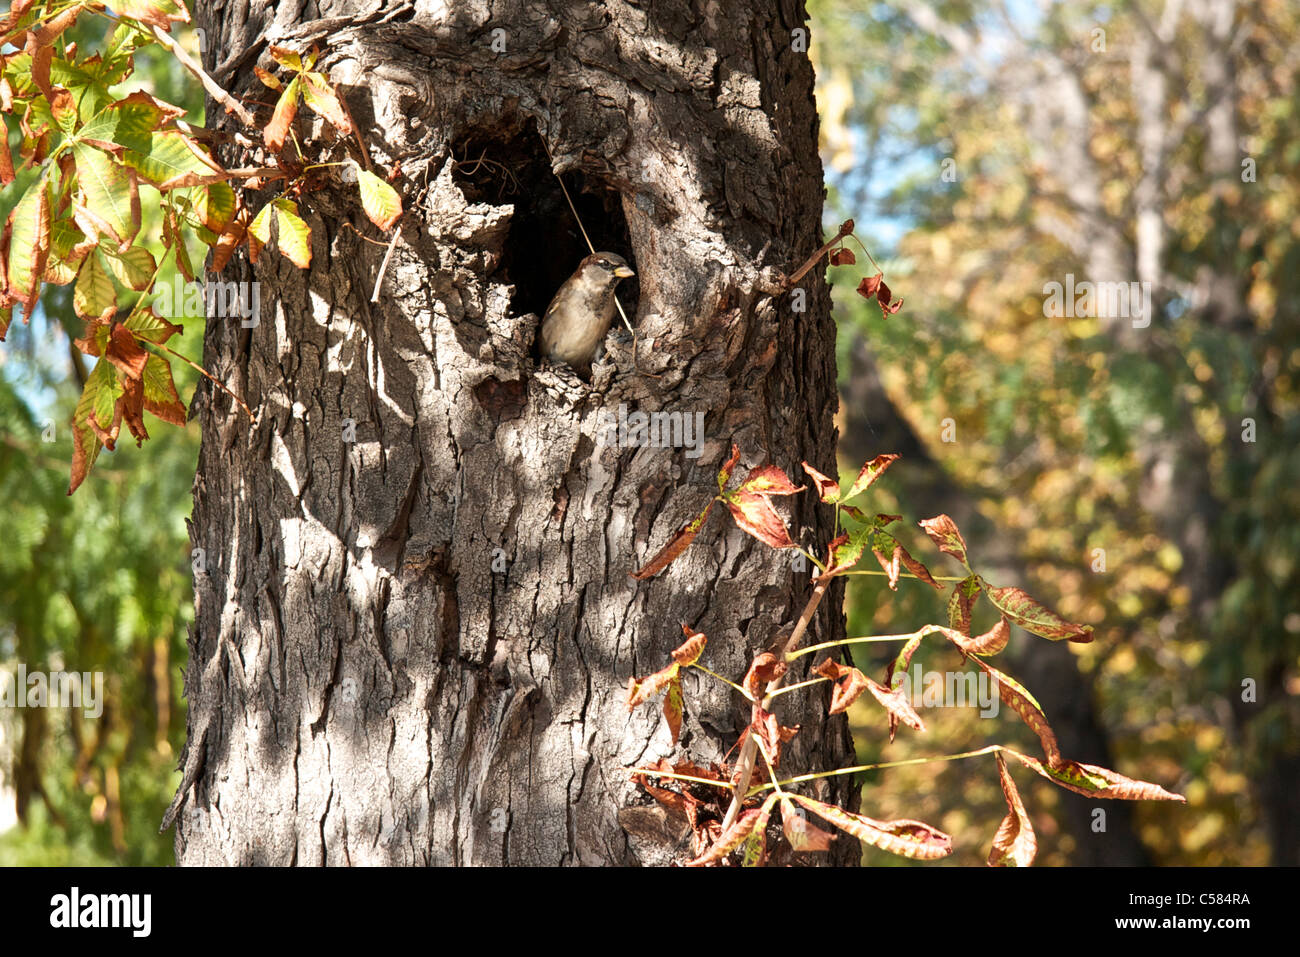 A young bird looks out of its tree hollow in which it was hatched Stock Photo